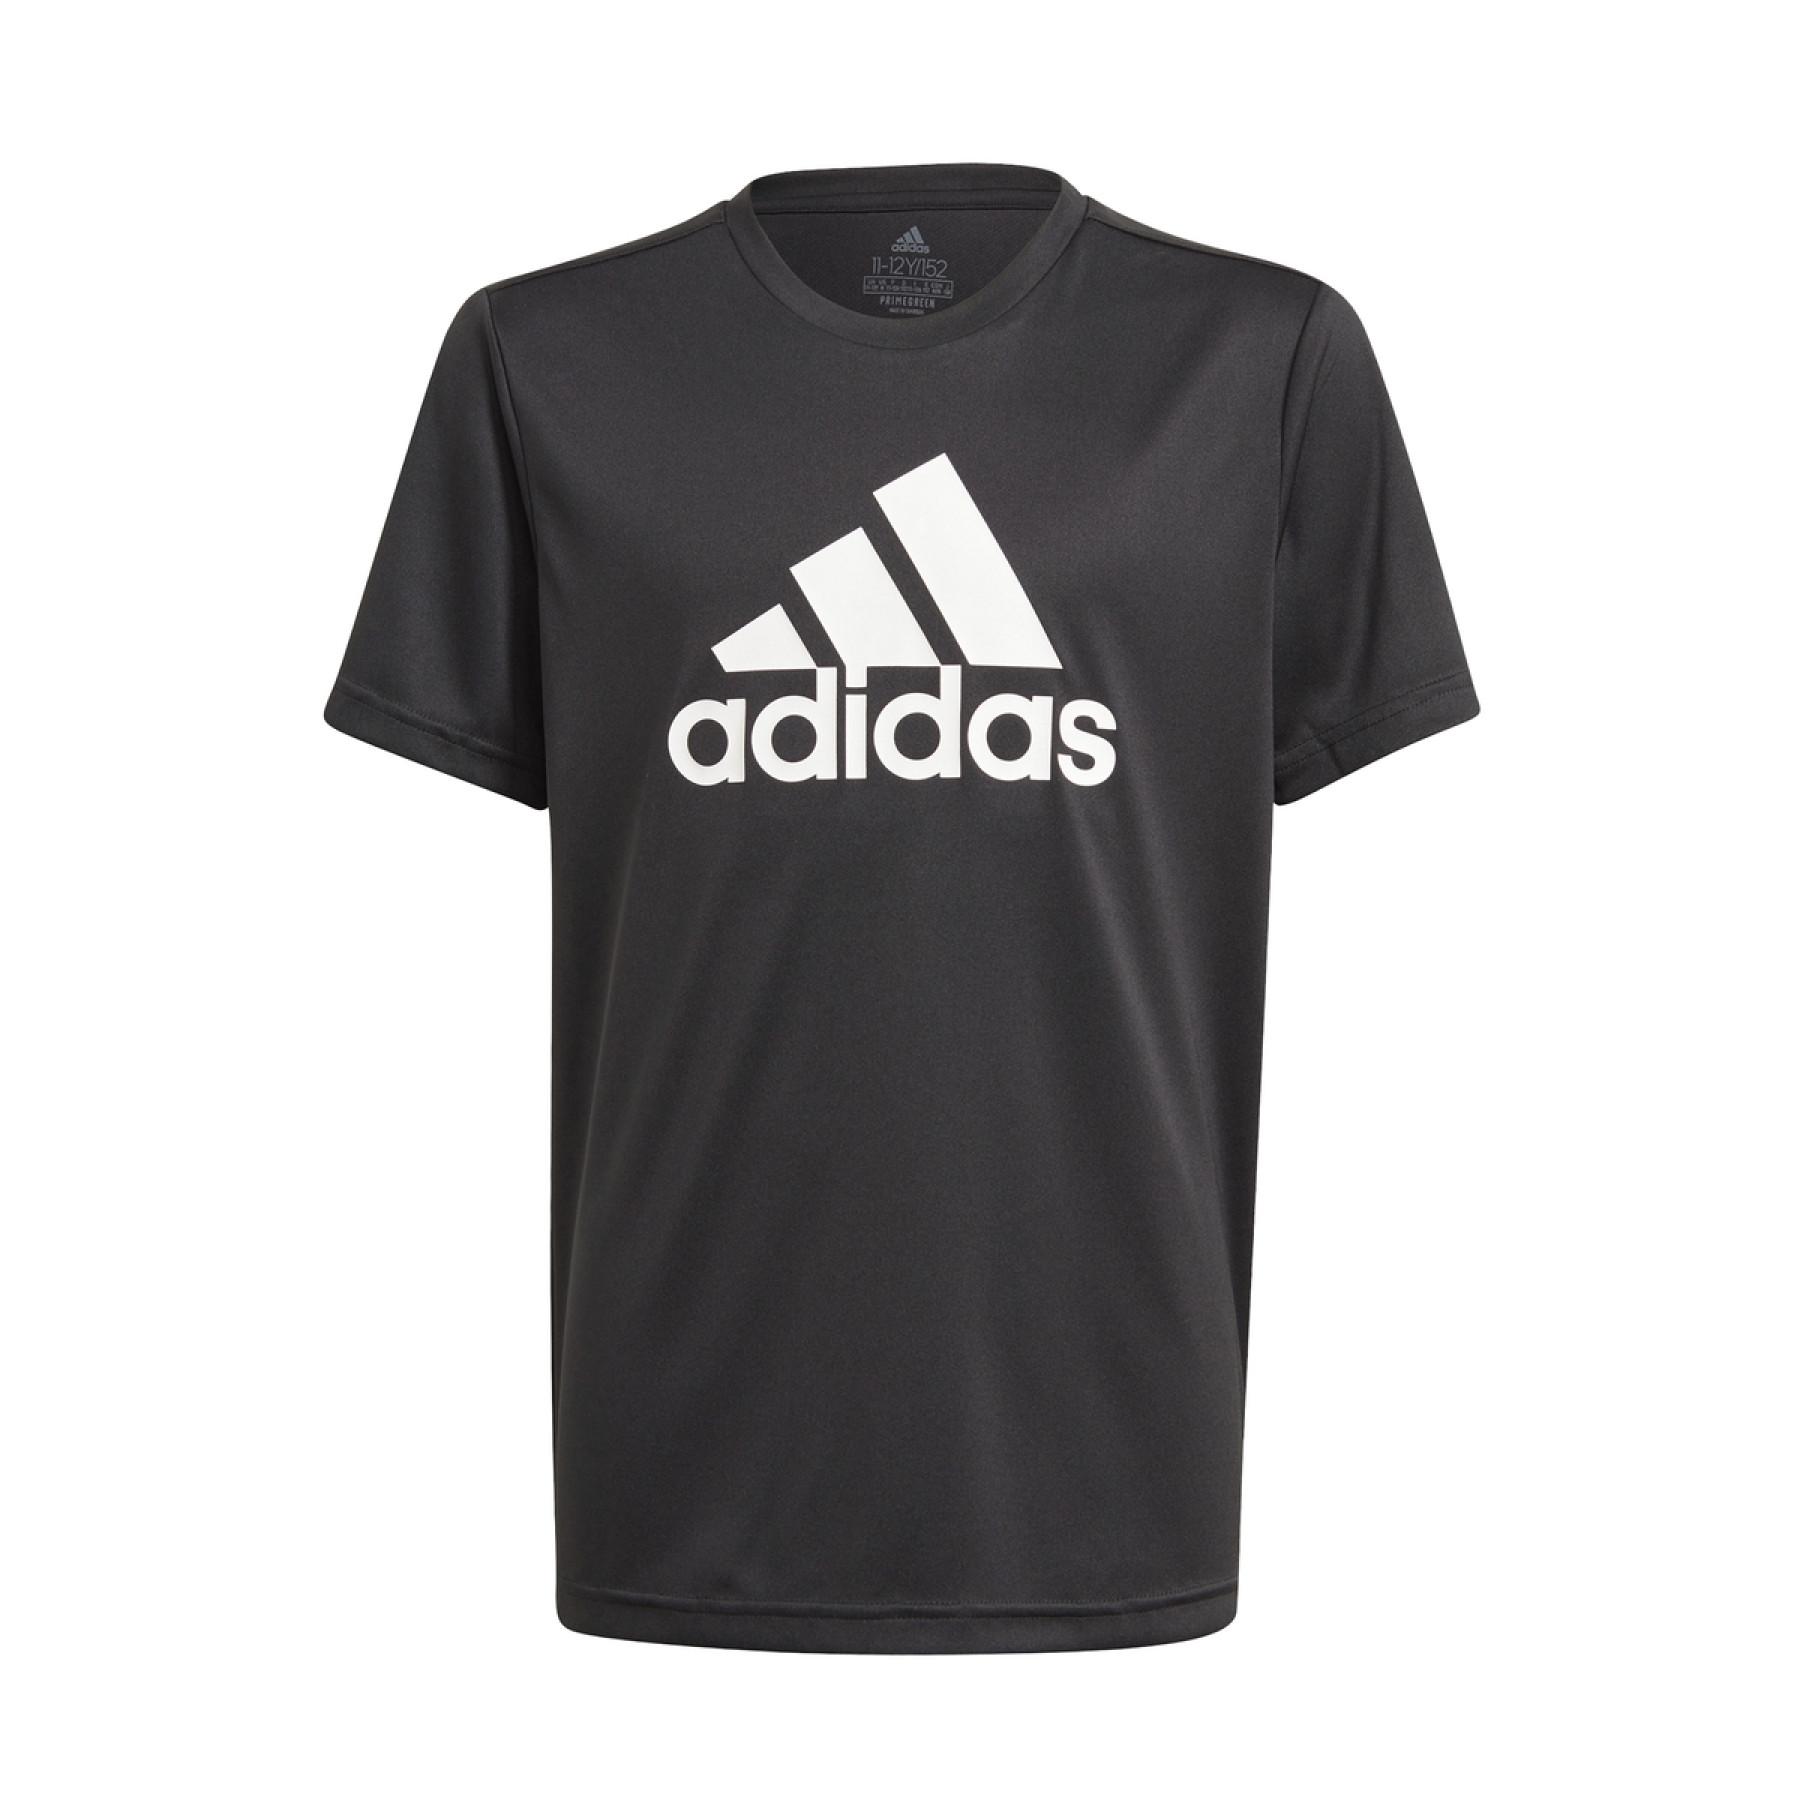 ze Kenia koppeling Child's T-shirt adidas Designed To Move Big Logo - T-shirts et polo shirts  - Junior Volleyball wear - Volleyball wear